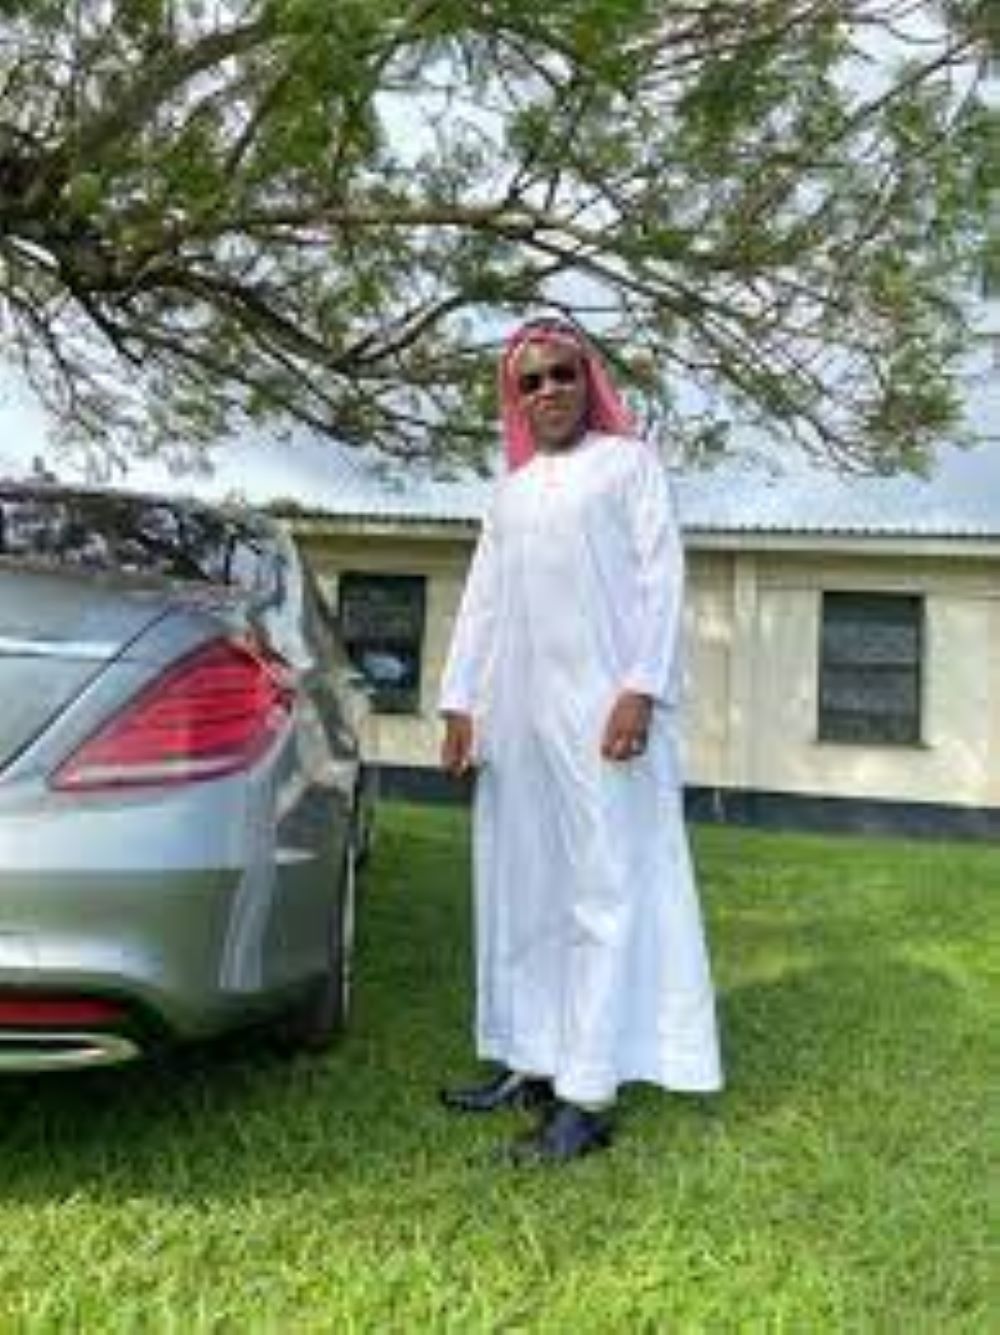 Frank Gashumba to lose Benz over unpaid debt